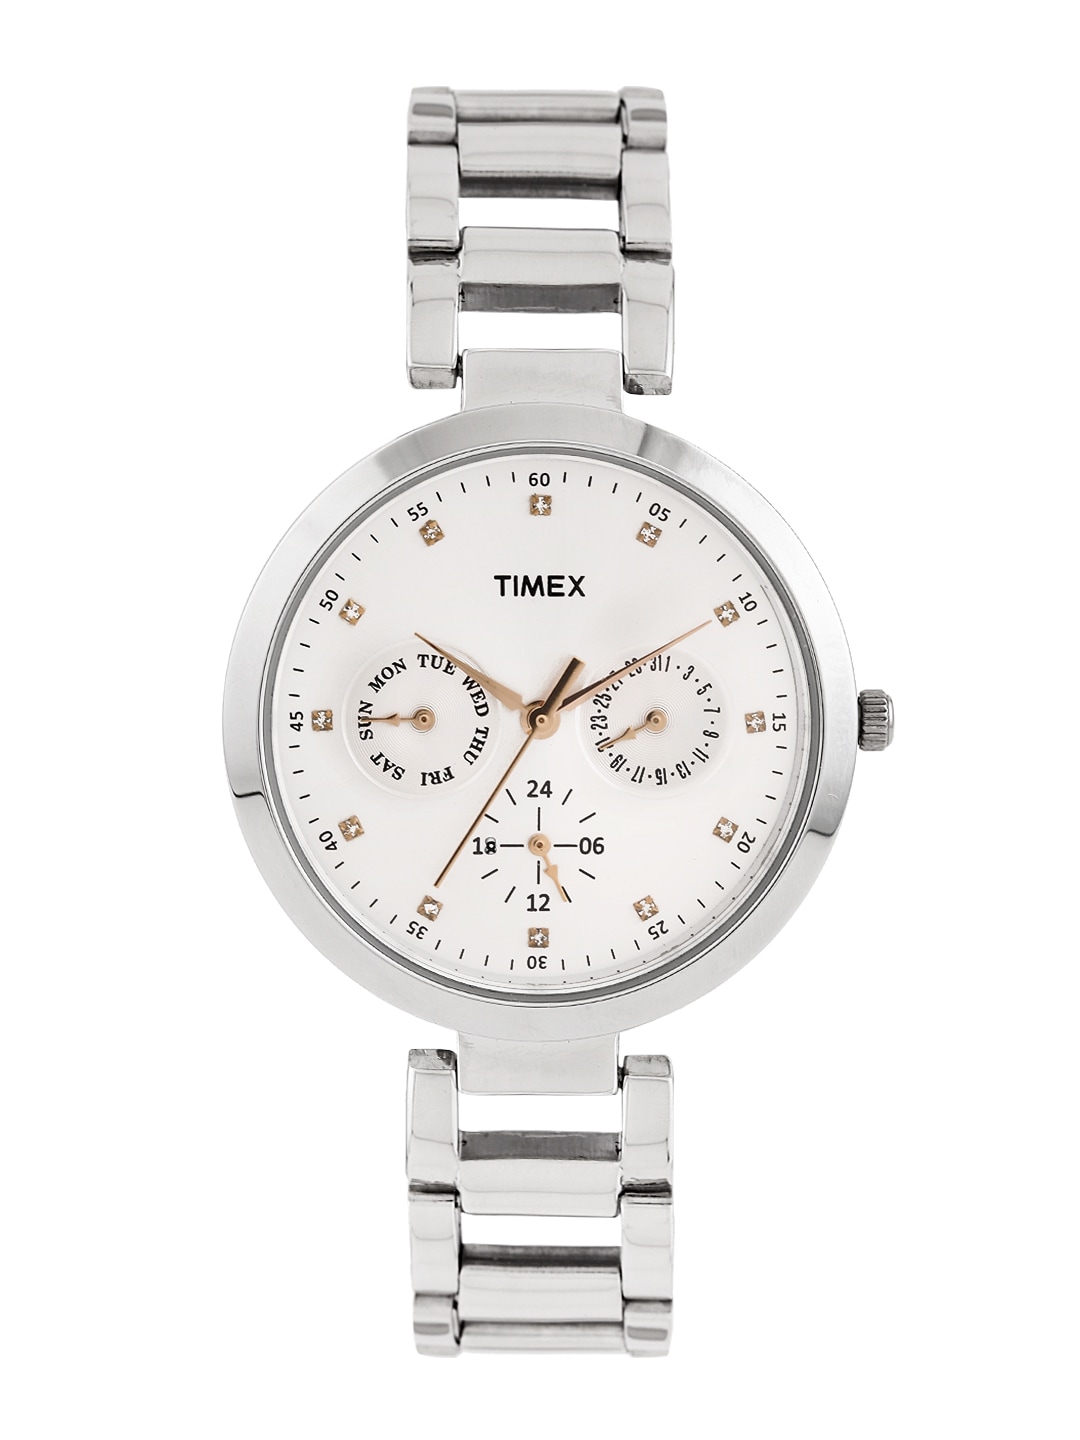 Timex Women Silver-Toned Multifunction Analogue Watch - TW000X204 Price in India